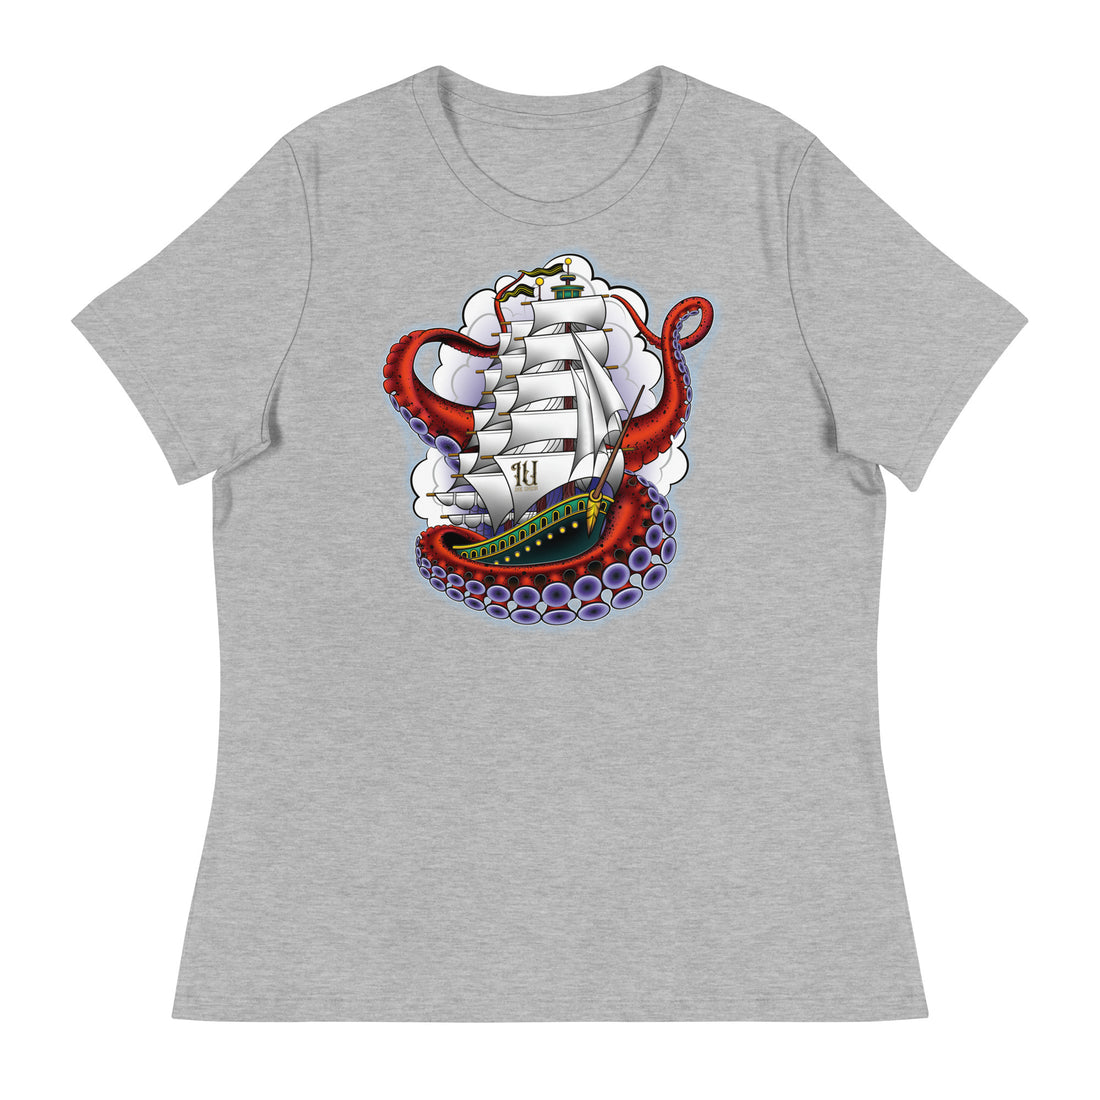 A light grey t-shirt with an old-school clipper ship tattoo design in green and brown with white sails surrounded by octopus tentacles in shades of red with purple tentacles. Behind the ship are purple-tinged clouds.